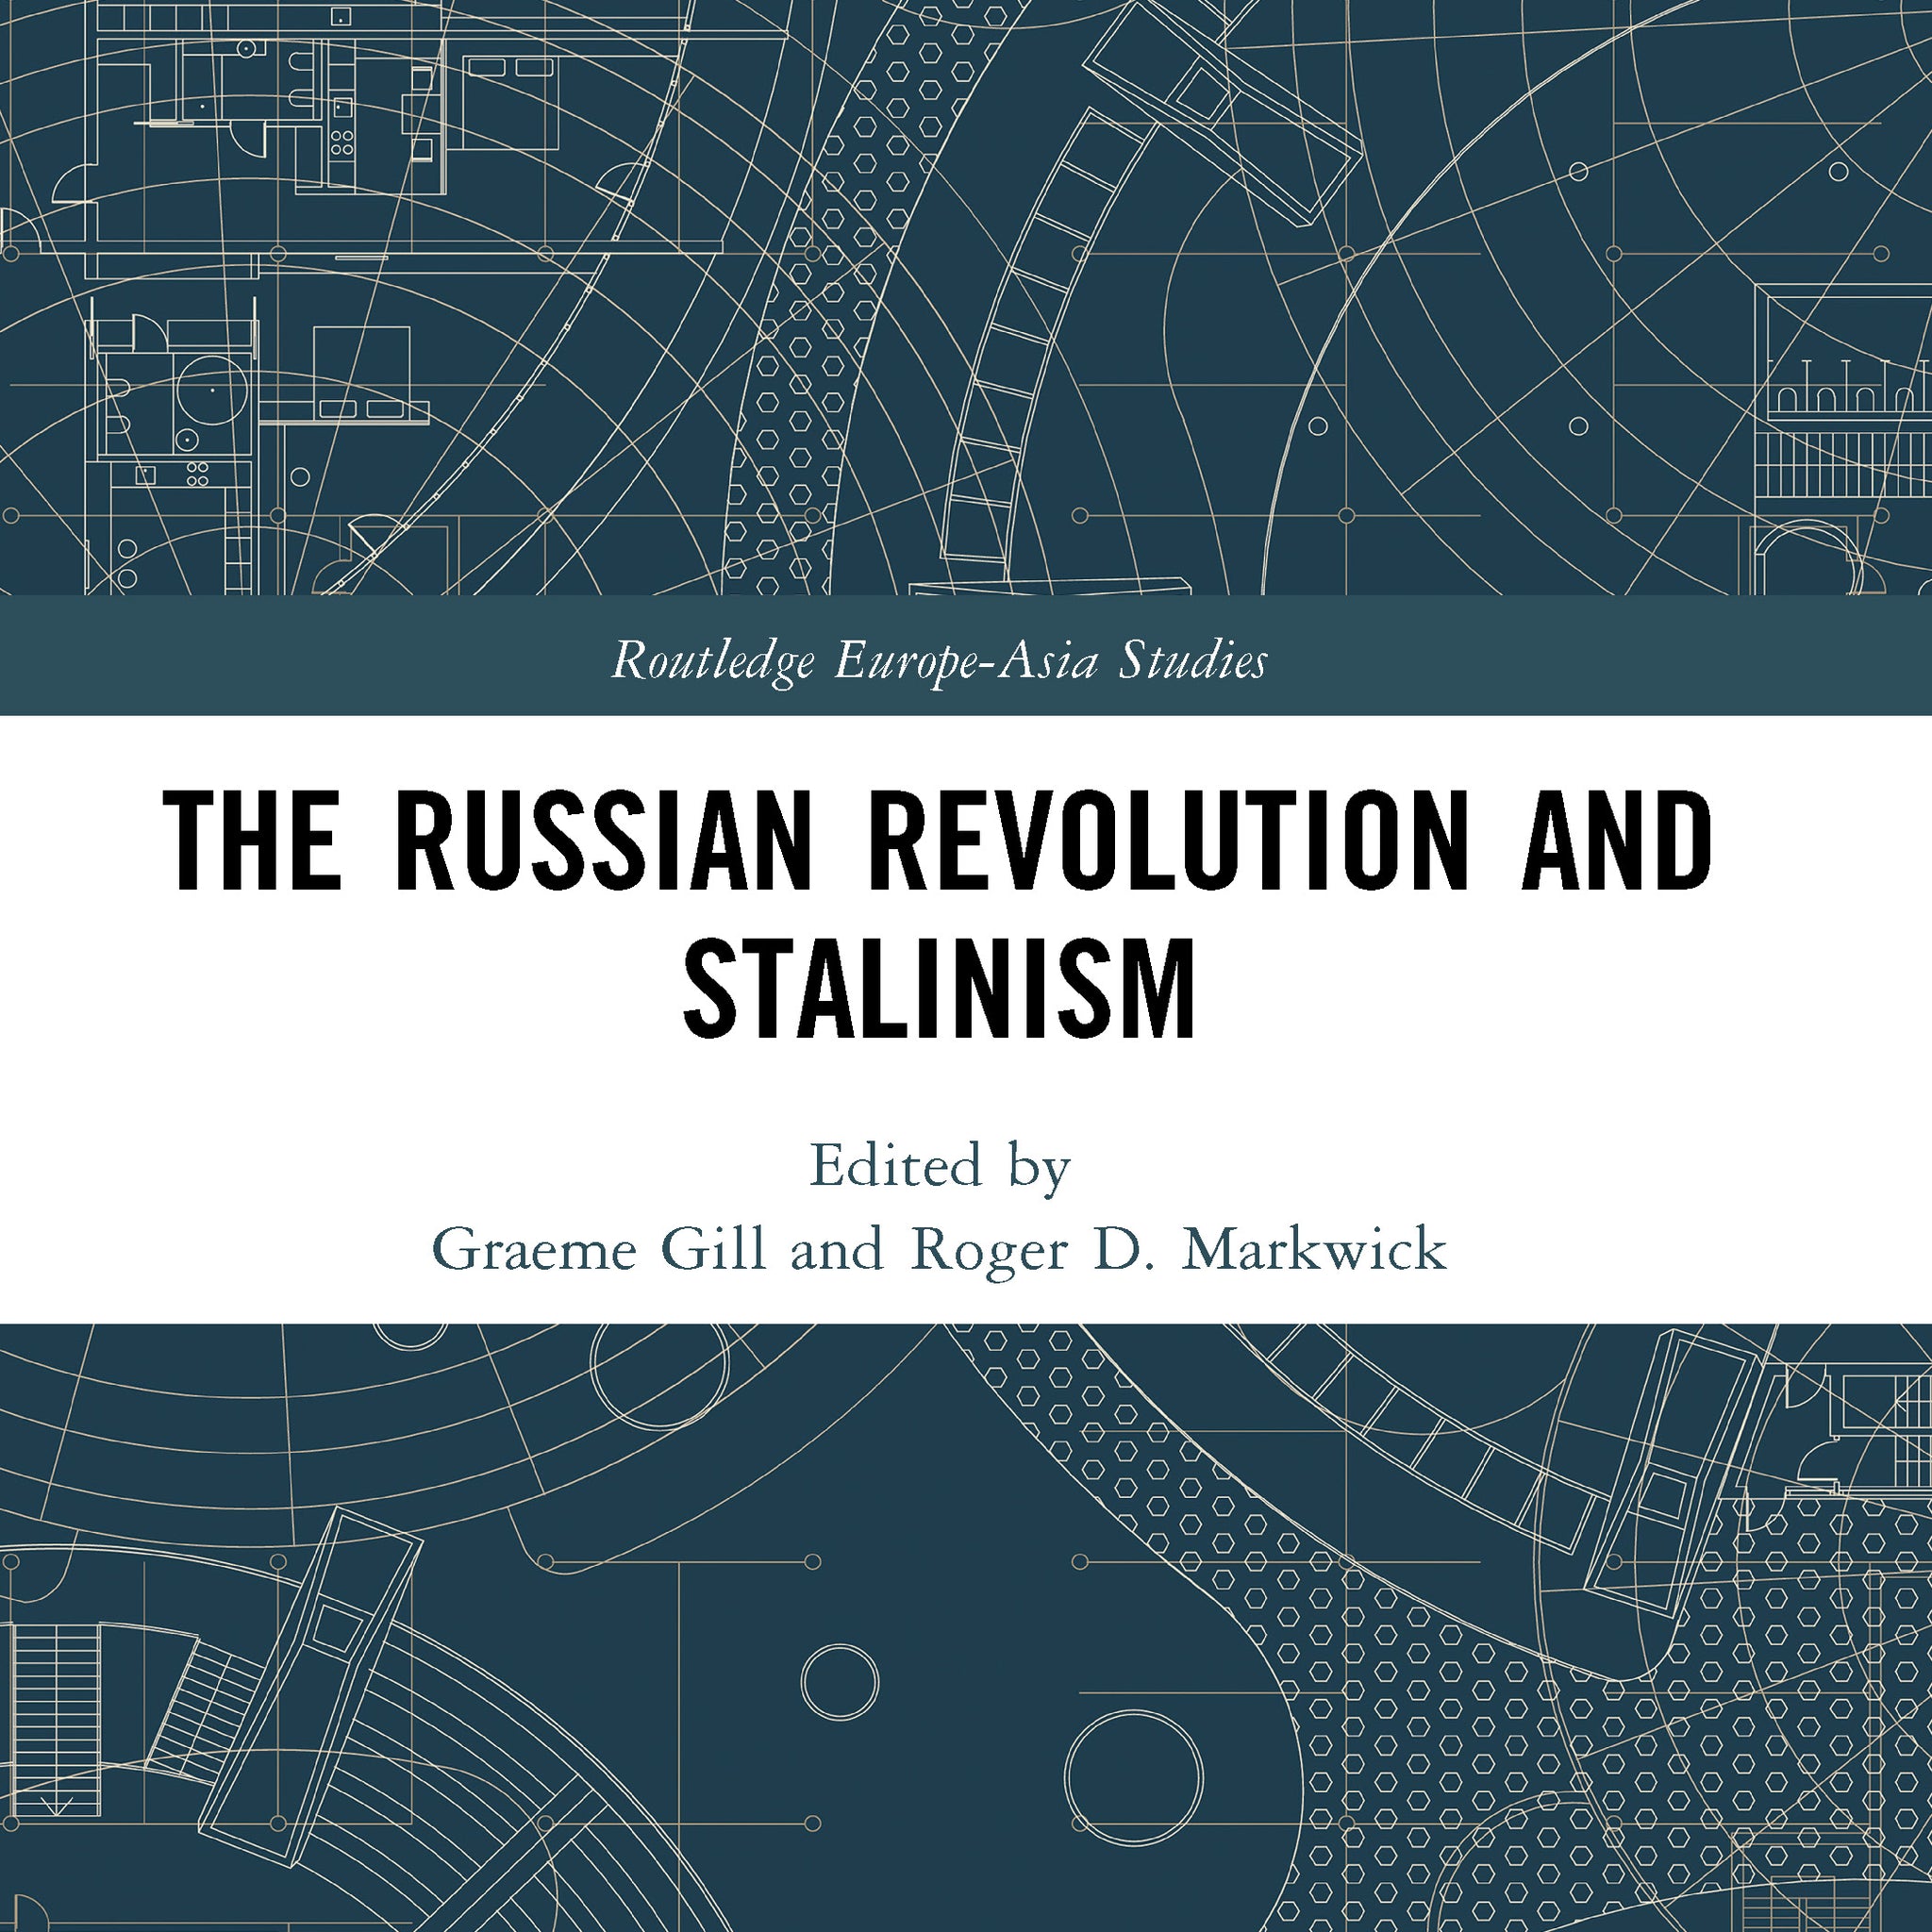 The Russian Revolution and Stalinism